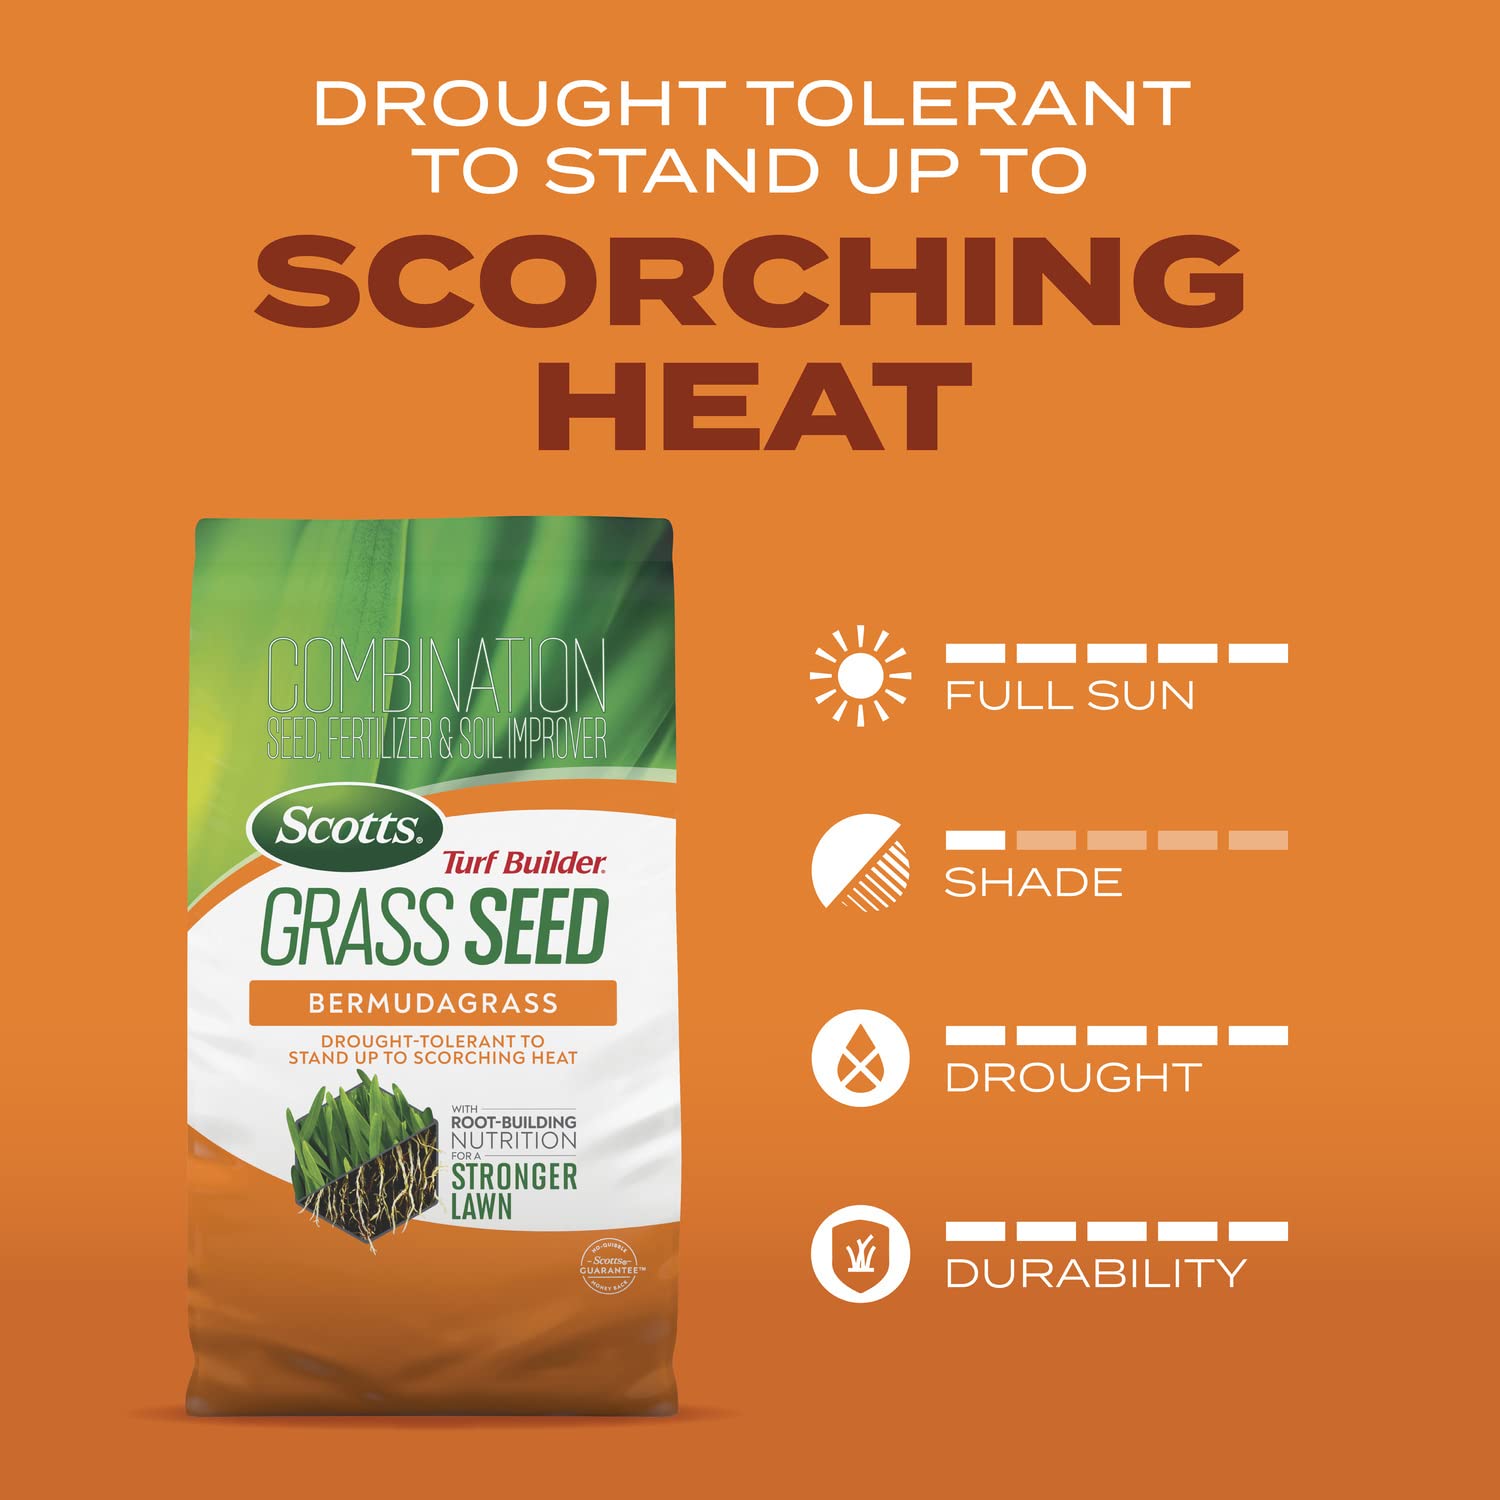 Scotts Turf Builder Grass Seed Bermudagrass with Fertilizer and Soil Improver, Drought-Tolerant, 8 lbs.